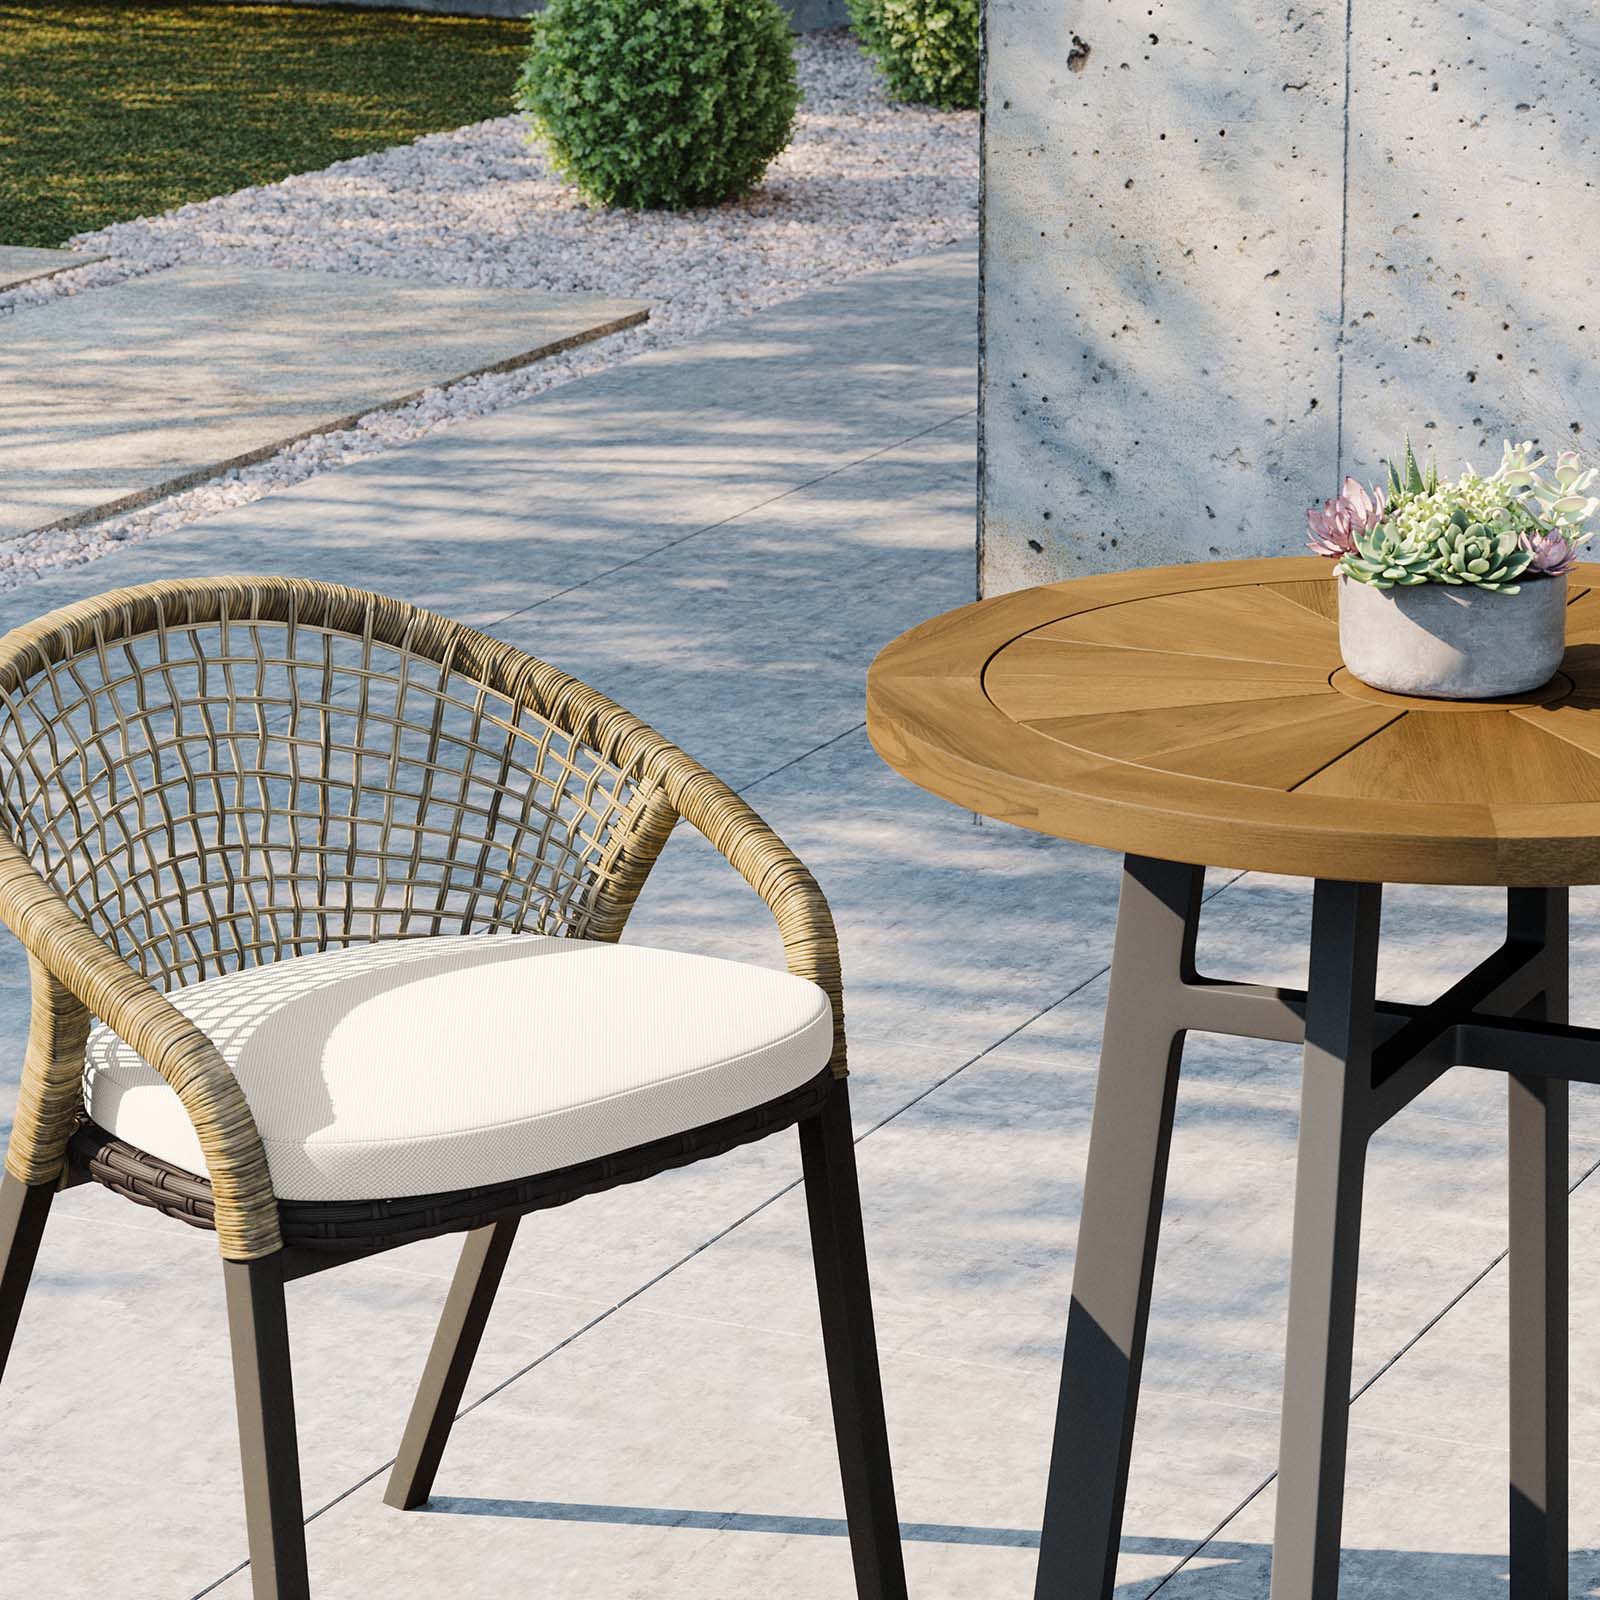 Meadow 3-Piece Outdoor Patio Dining Set - East Shore Modern Home Furnishings